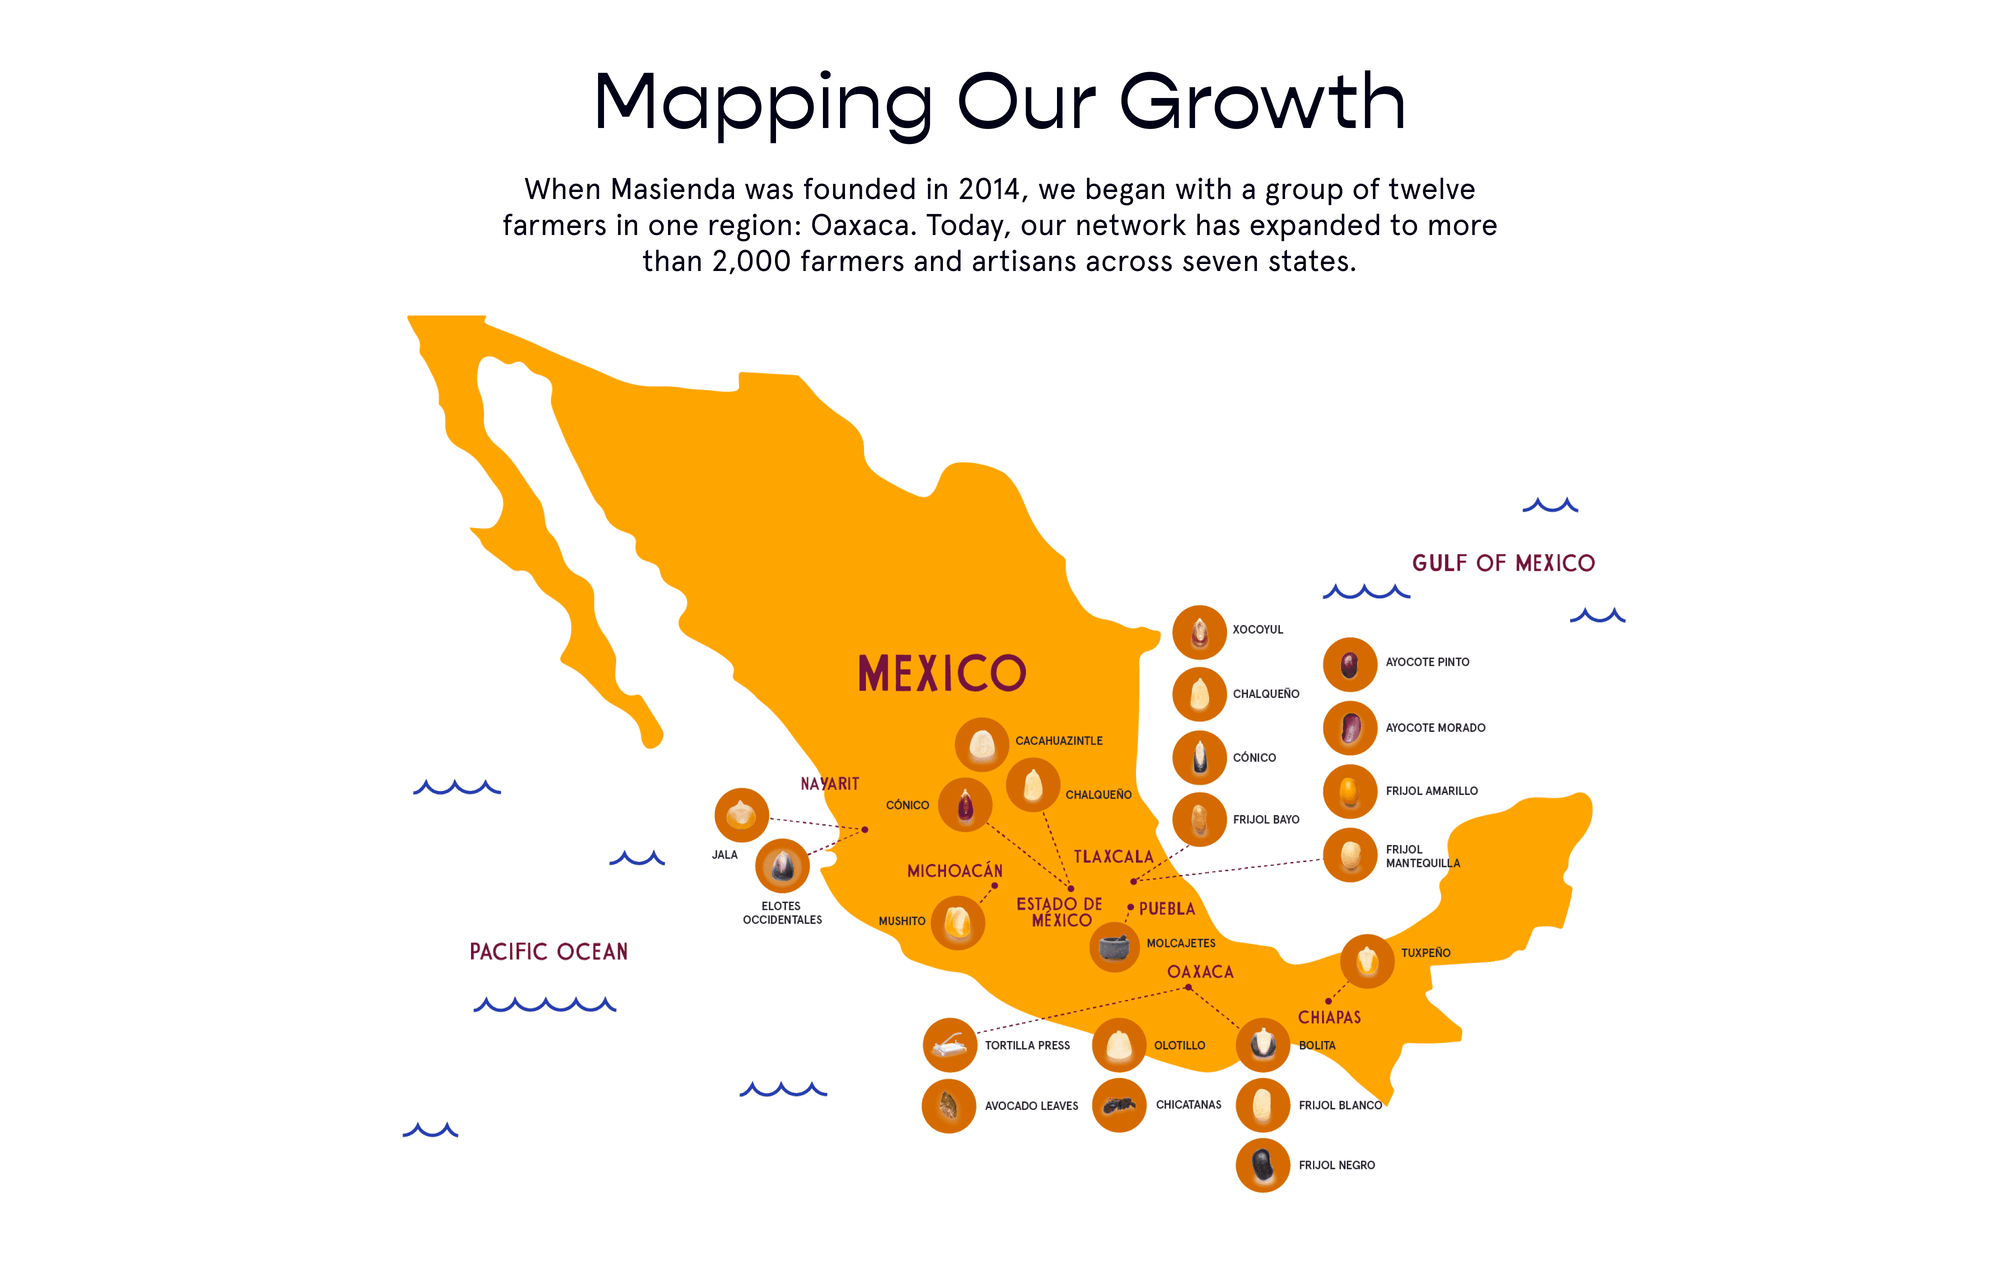 Mapping Our Growth